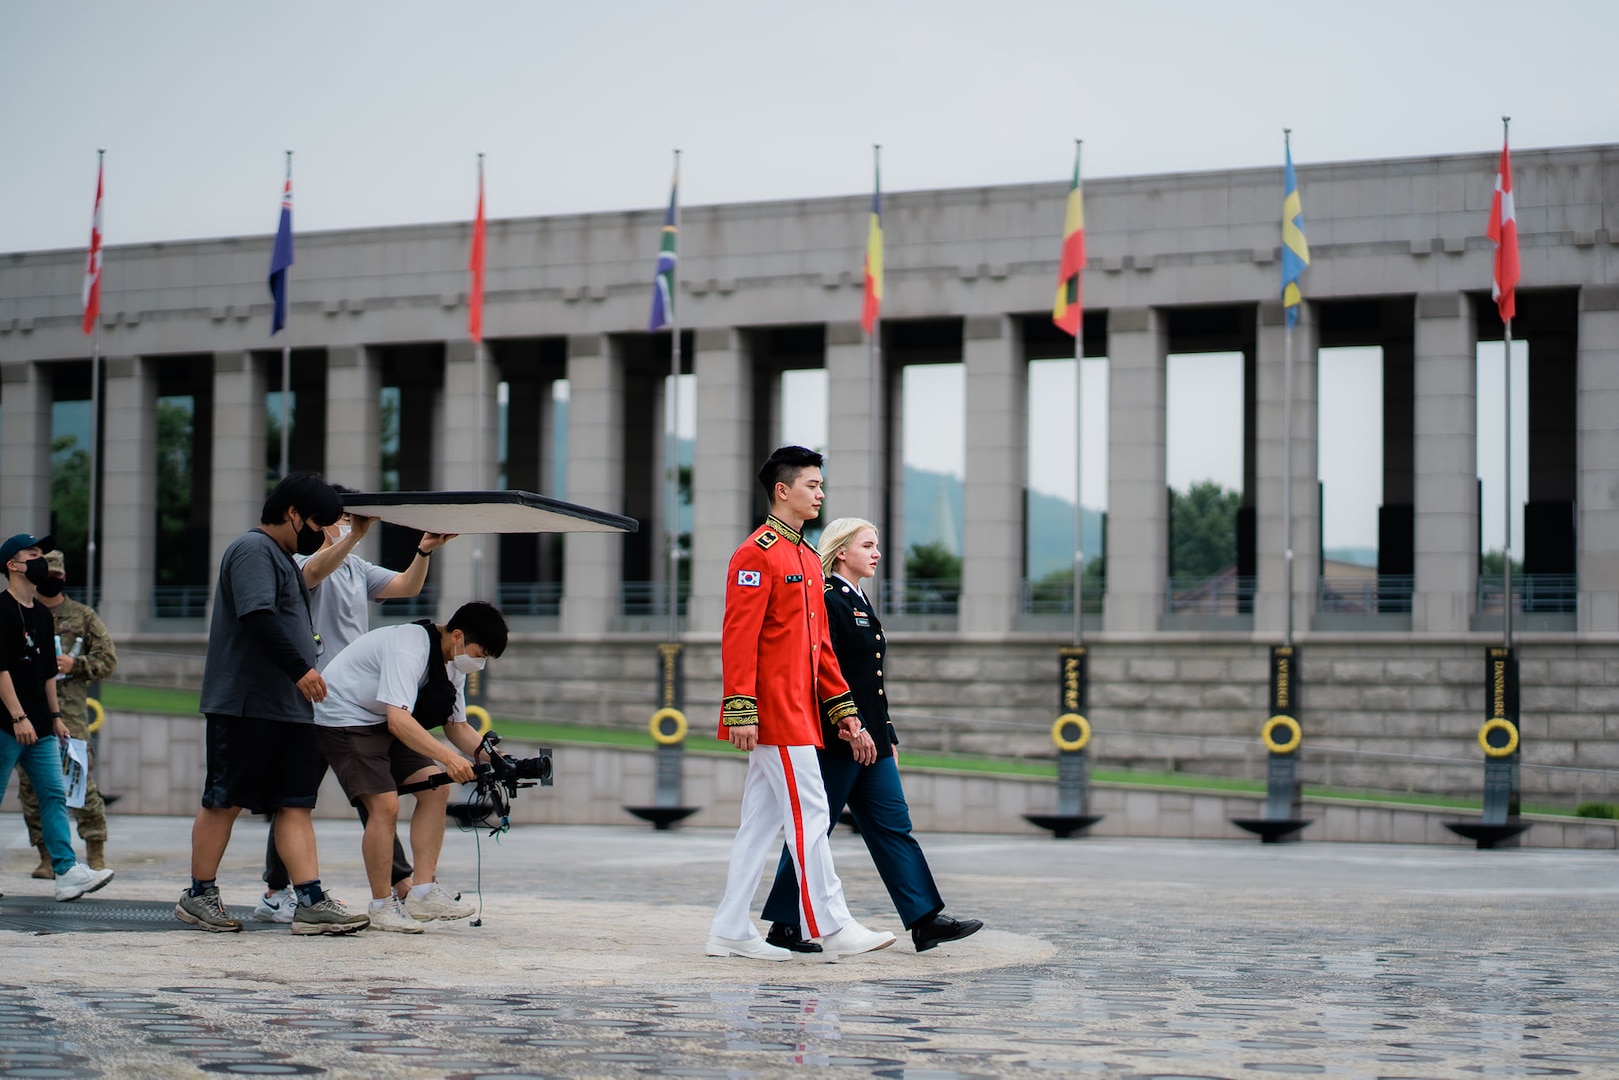 ROK Army Sgt. Yook Sung-jae in dress uniform and U.S. Army Spc. Brittany D. Simmons also in dress uniform are walking in the center with a video crew following behind. They are walking outside at the War Memorial of Korea in Seoul and there is a row of world flags behind them.